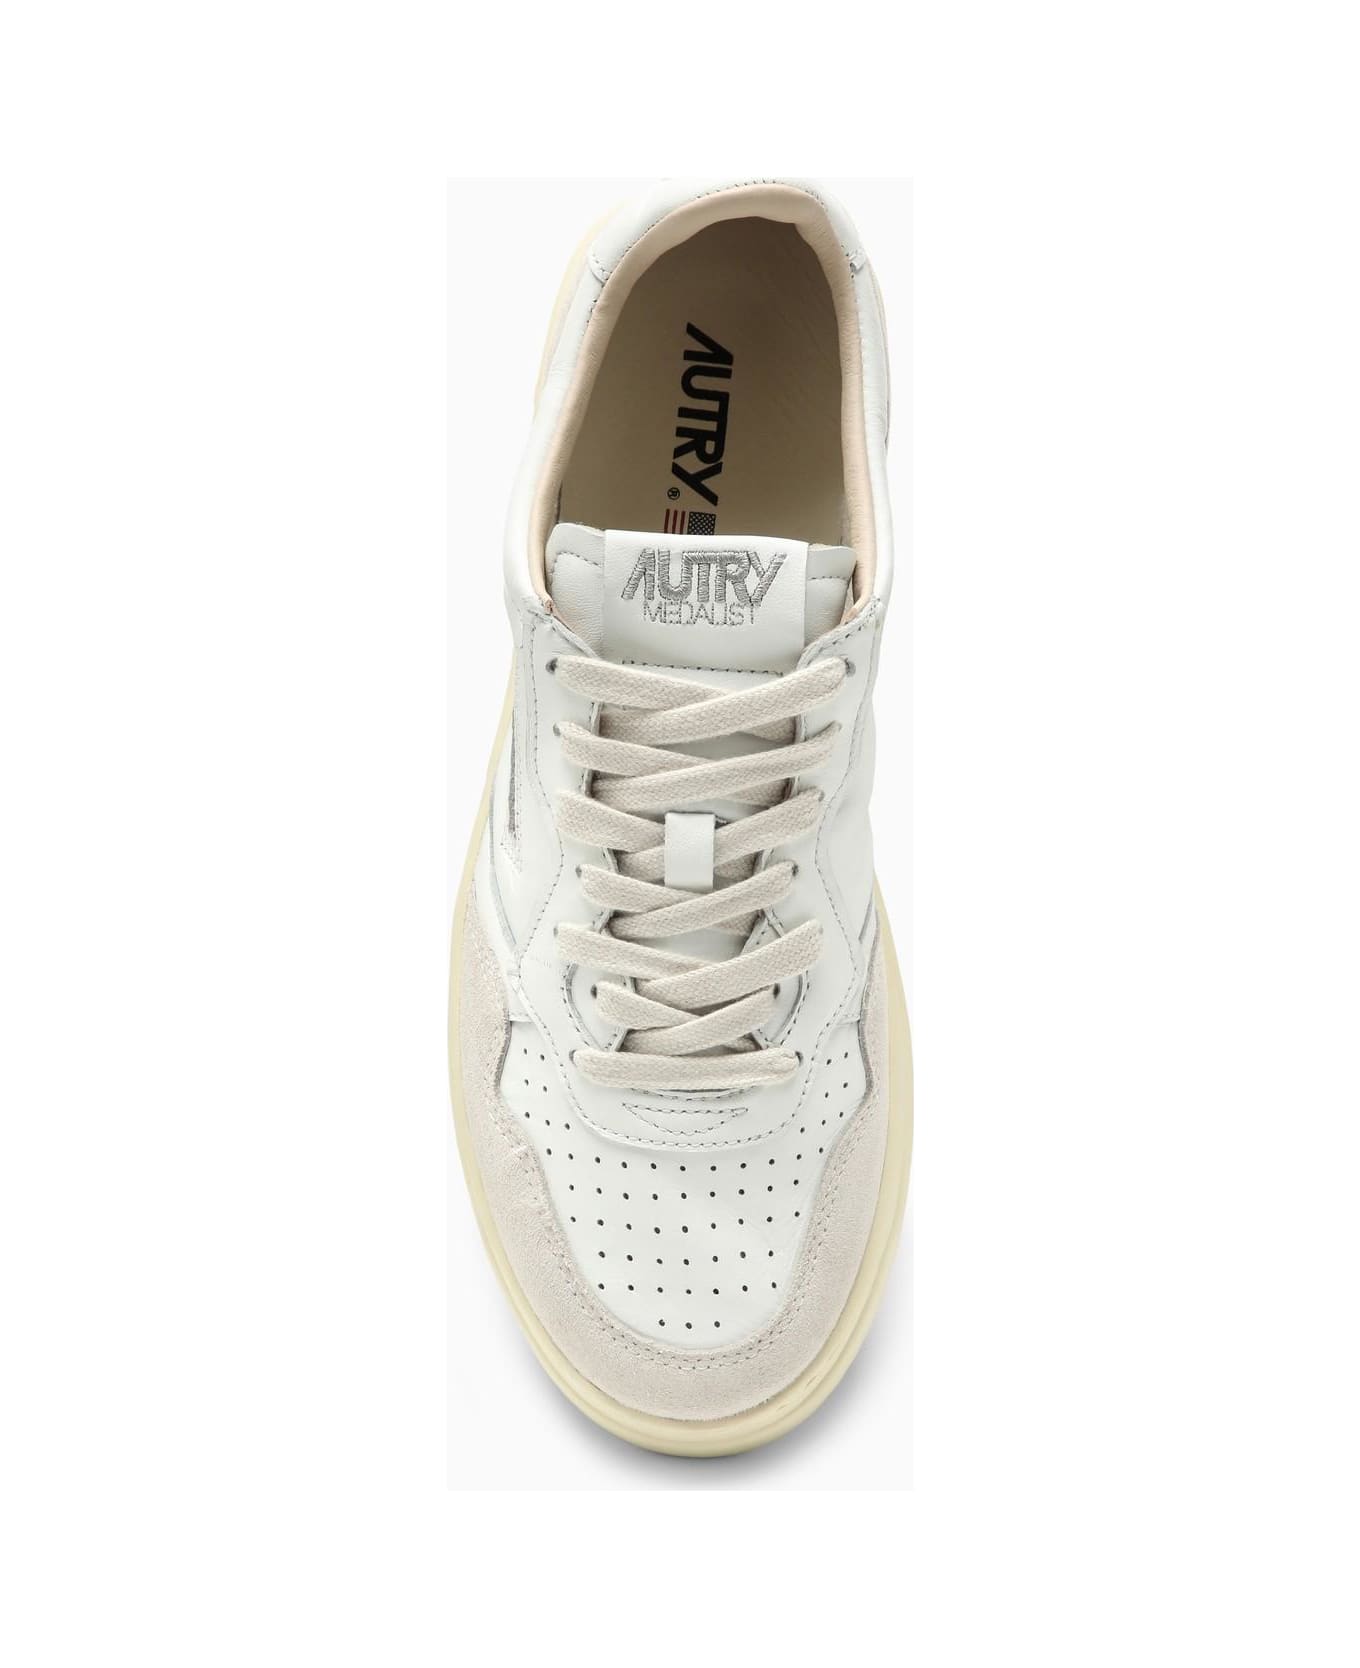 Autry Medalist Trainer In White Leather And Suede スニーカー